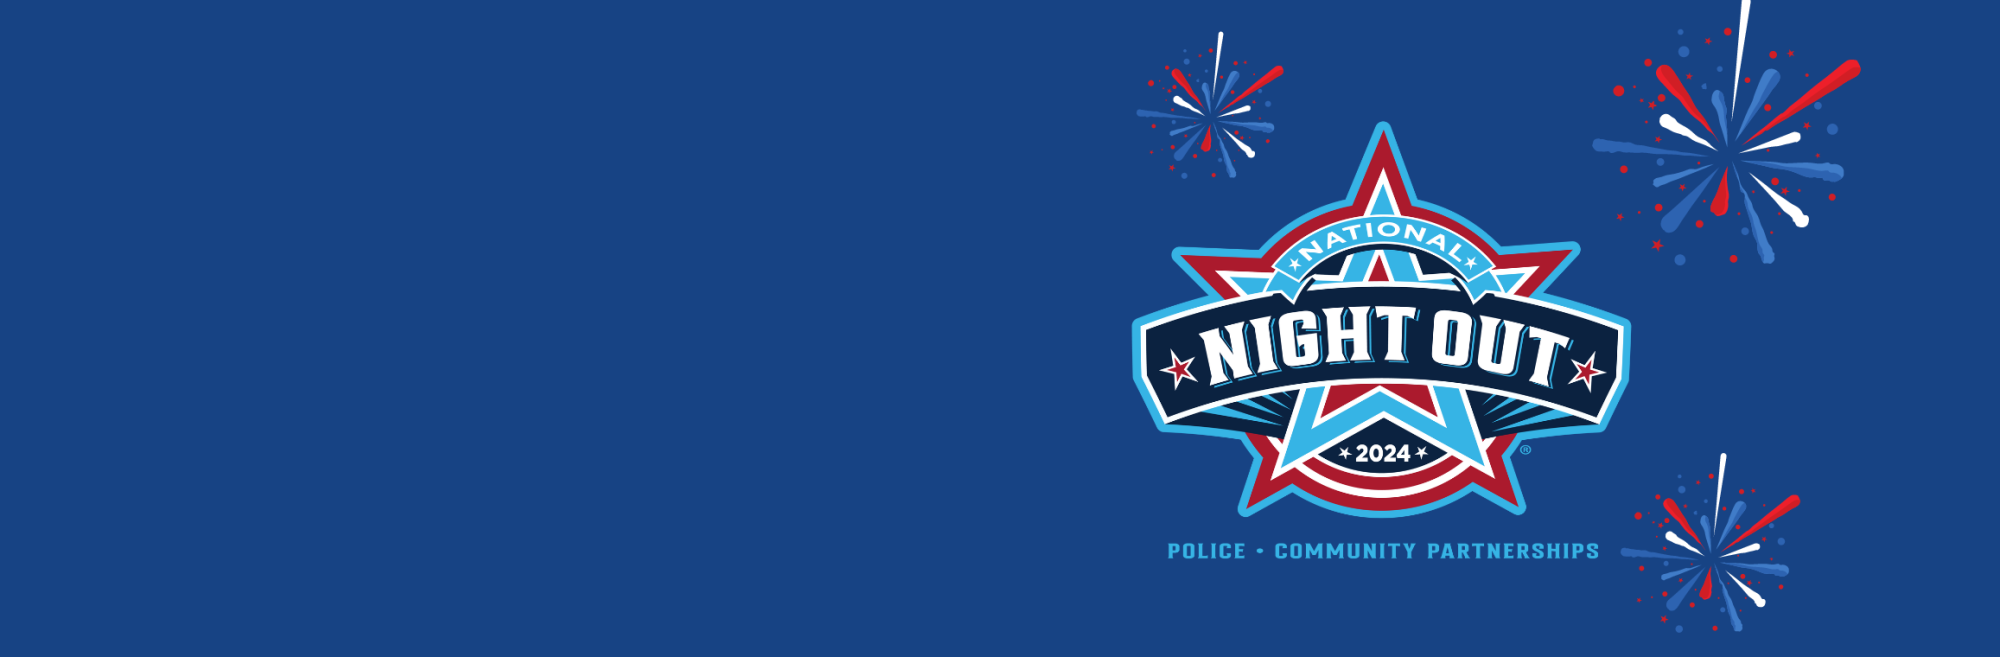 blue background with star shape on the right hand side. Text: "National Night Out 2024"